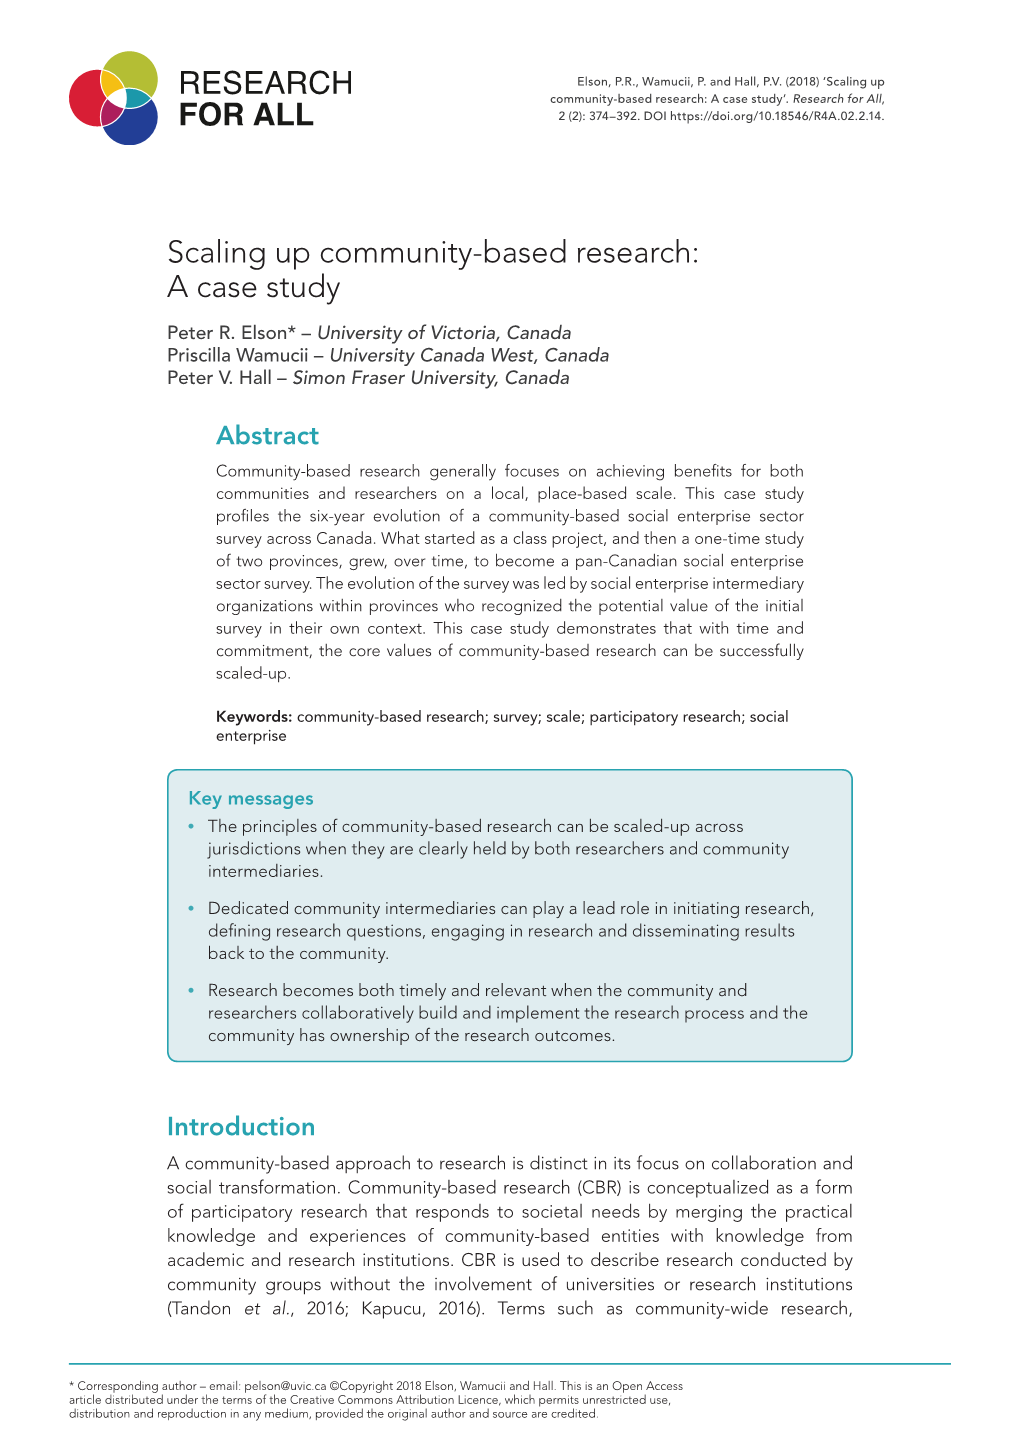 Scaling up Community-Based Research: a Case Study’